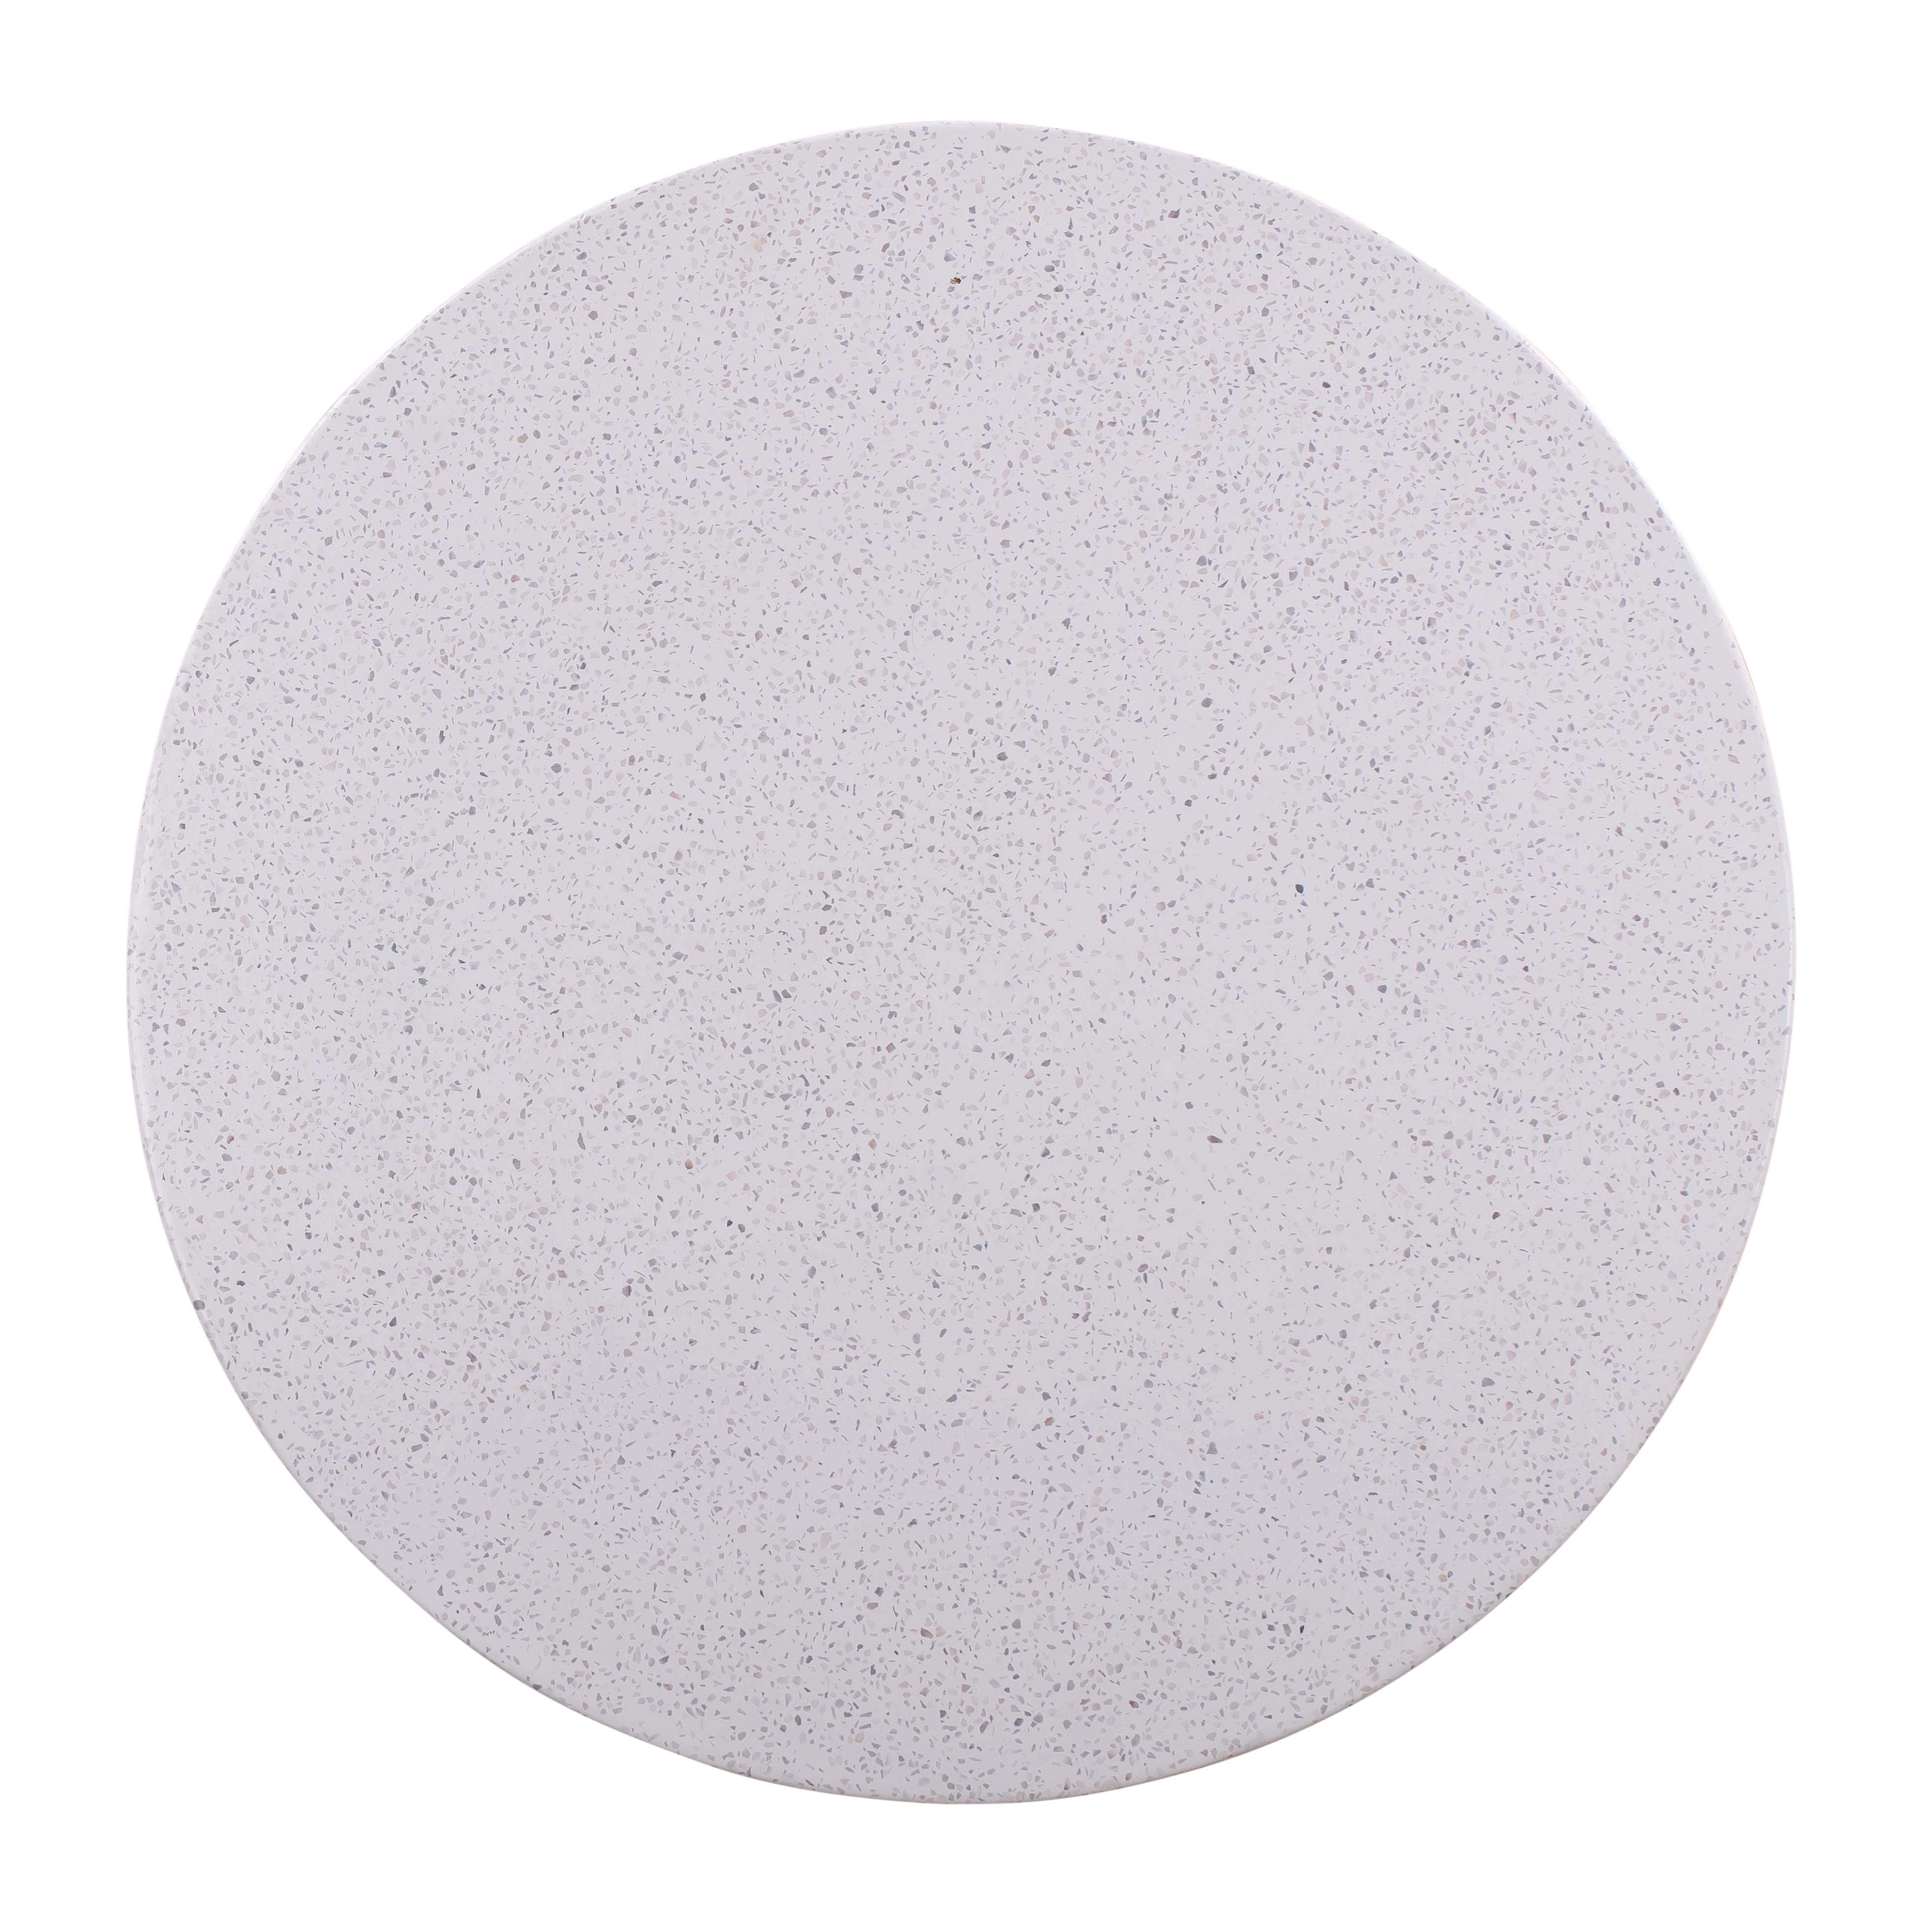 Terrazzo Light Speckled Coffee Table - Image 2